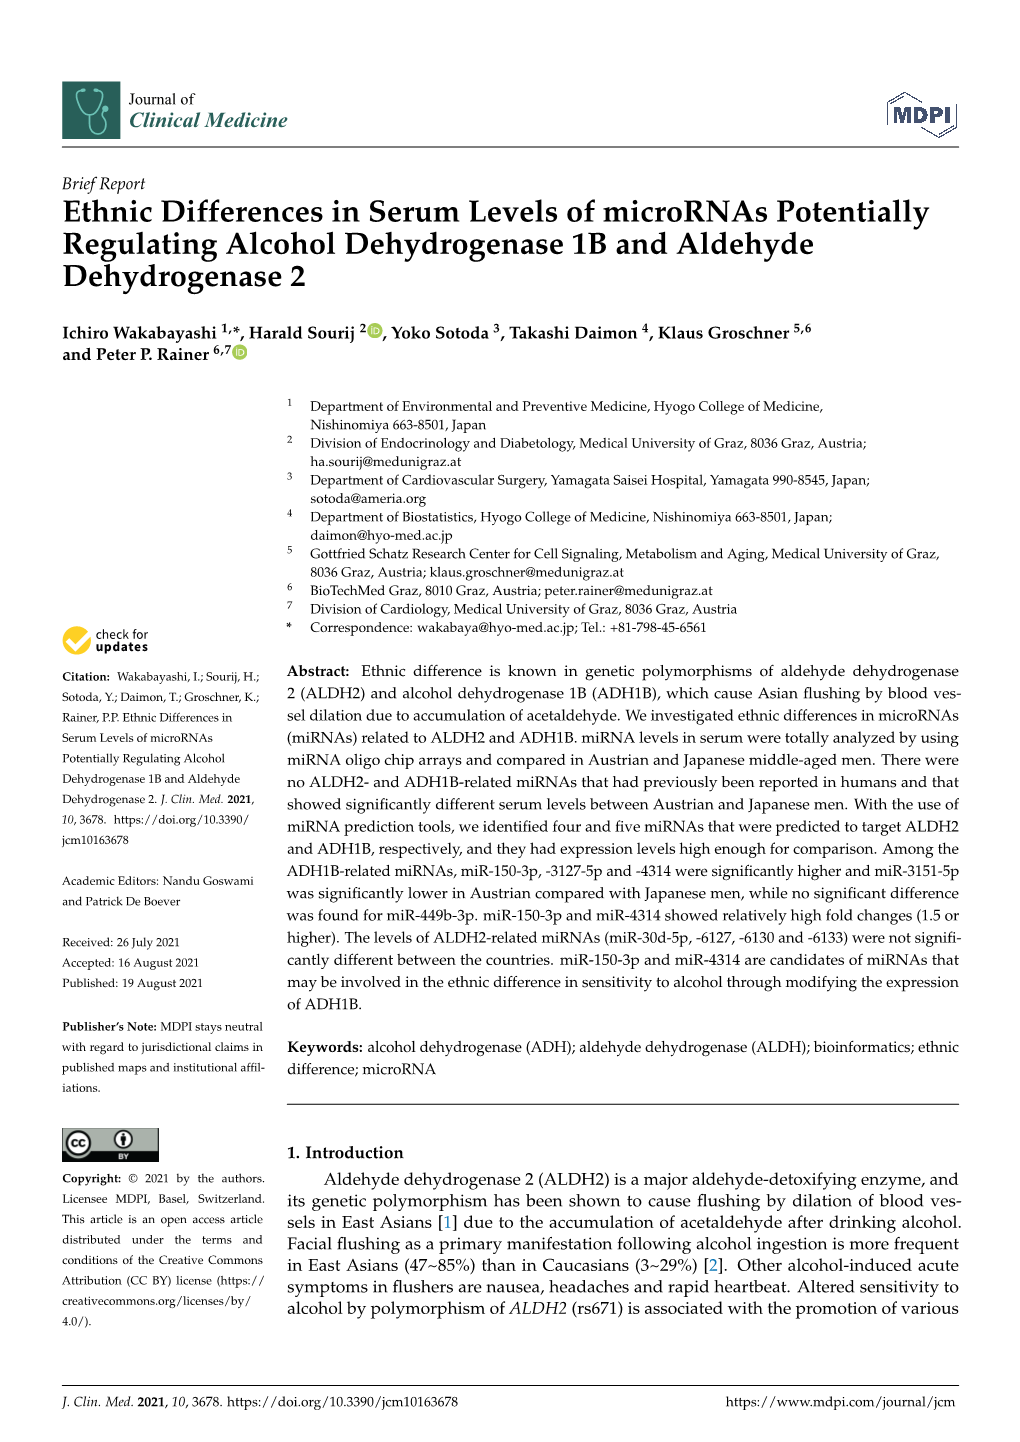 Ethnic Differences in Serum Levels of Micrornas Potentially Regulating Alcohol Dehydrogenase 1B and Aldehyde Dehydrogenase 2